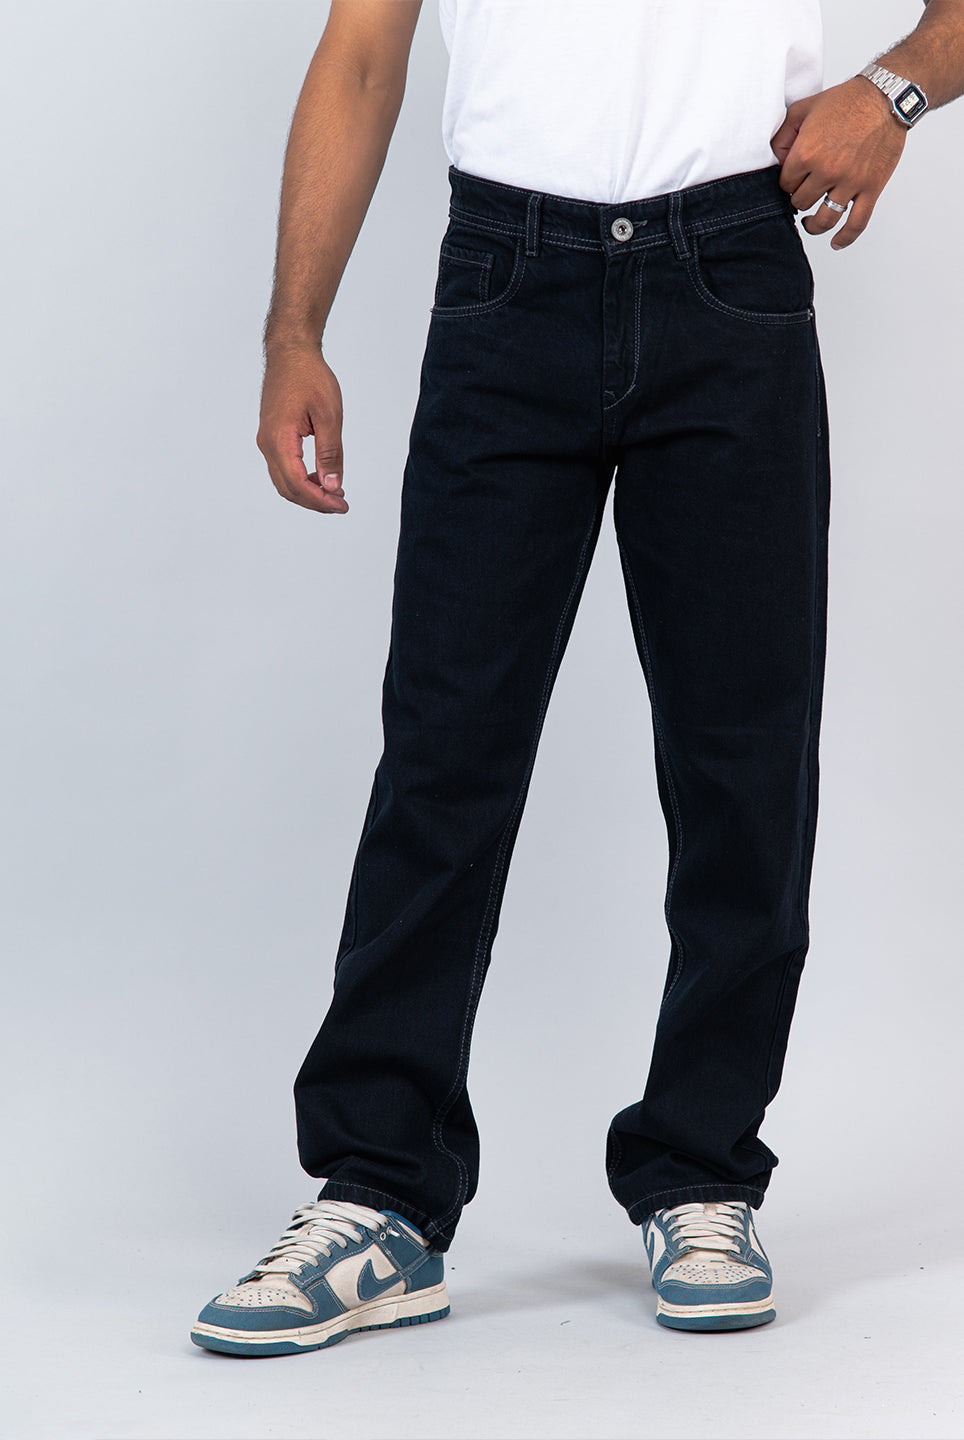 navy blue straight fit mens jeans